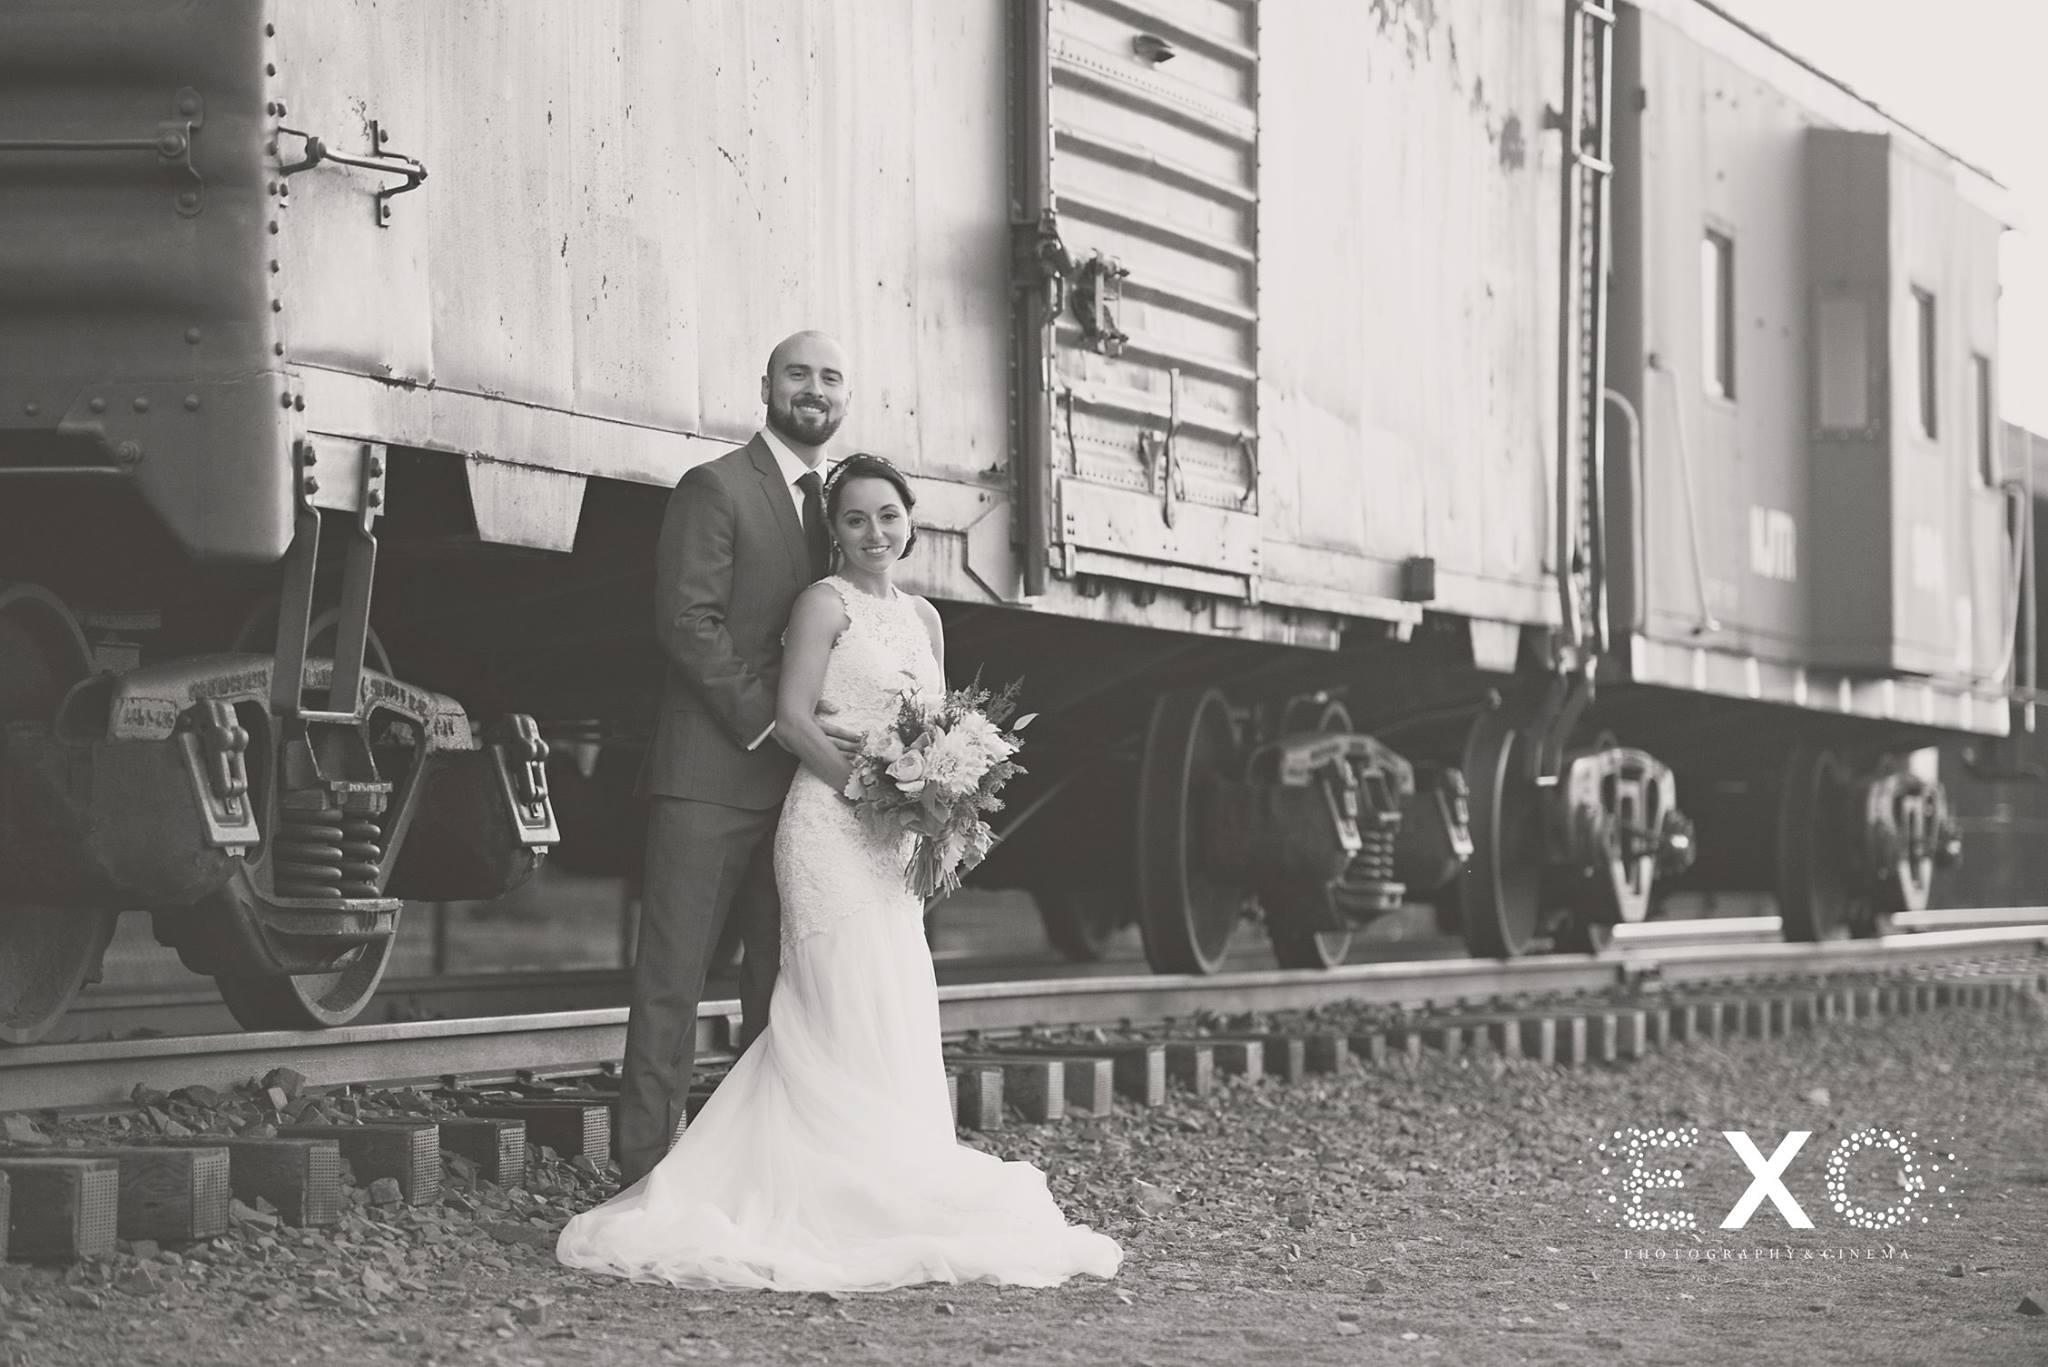 black and white image of bride and groom by train car